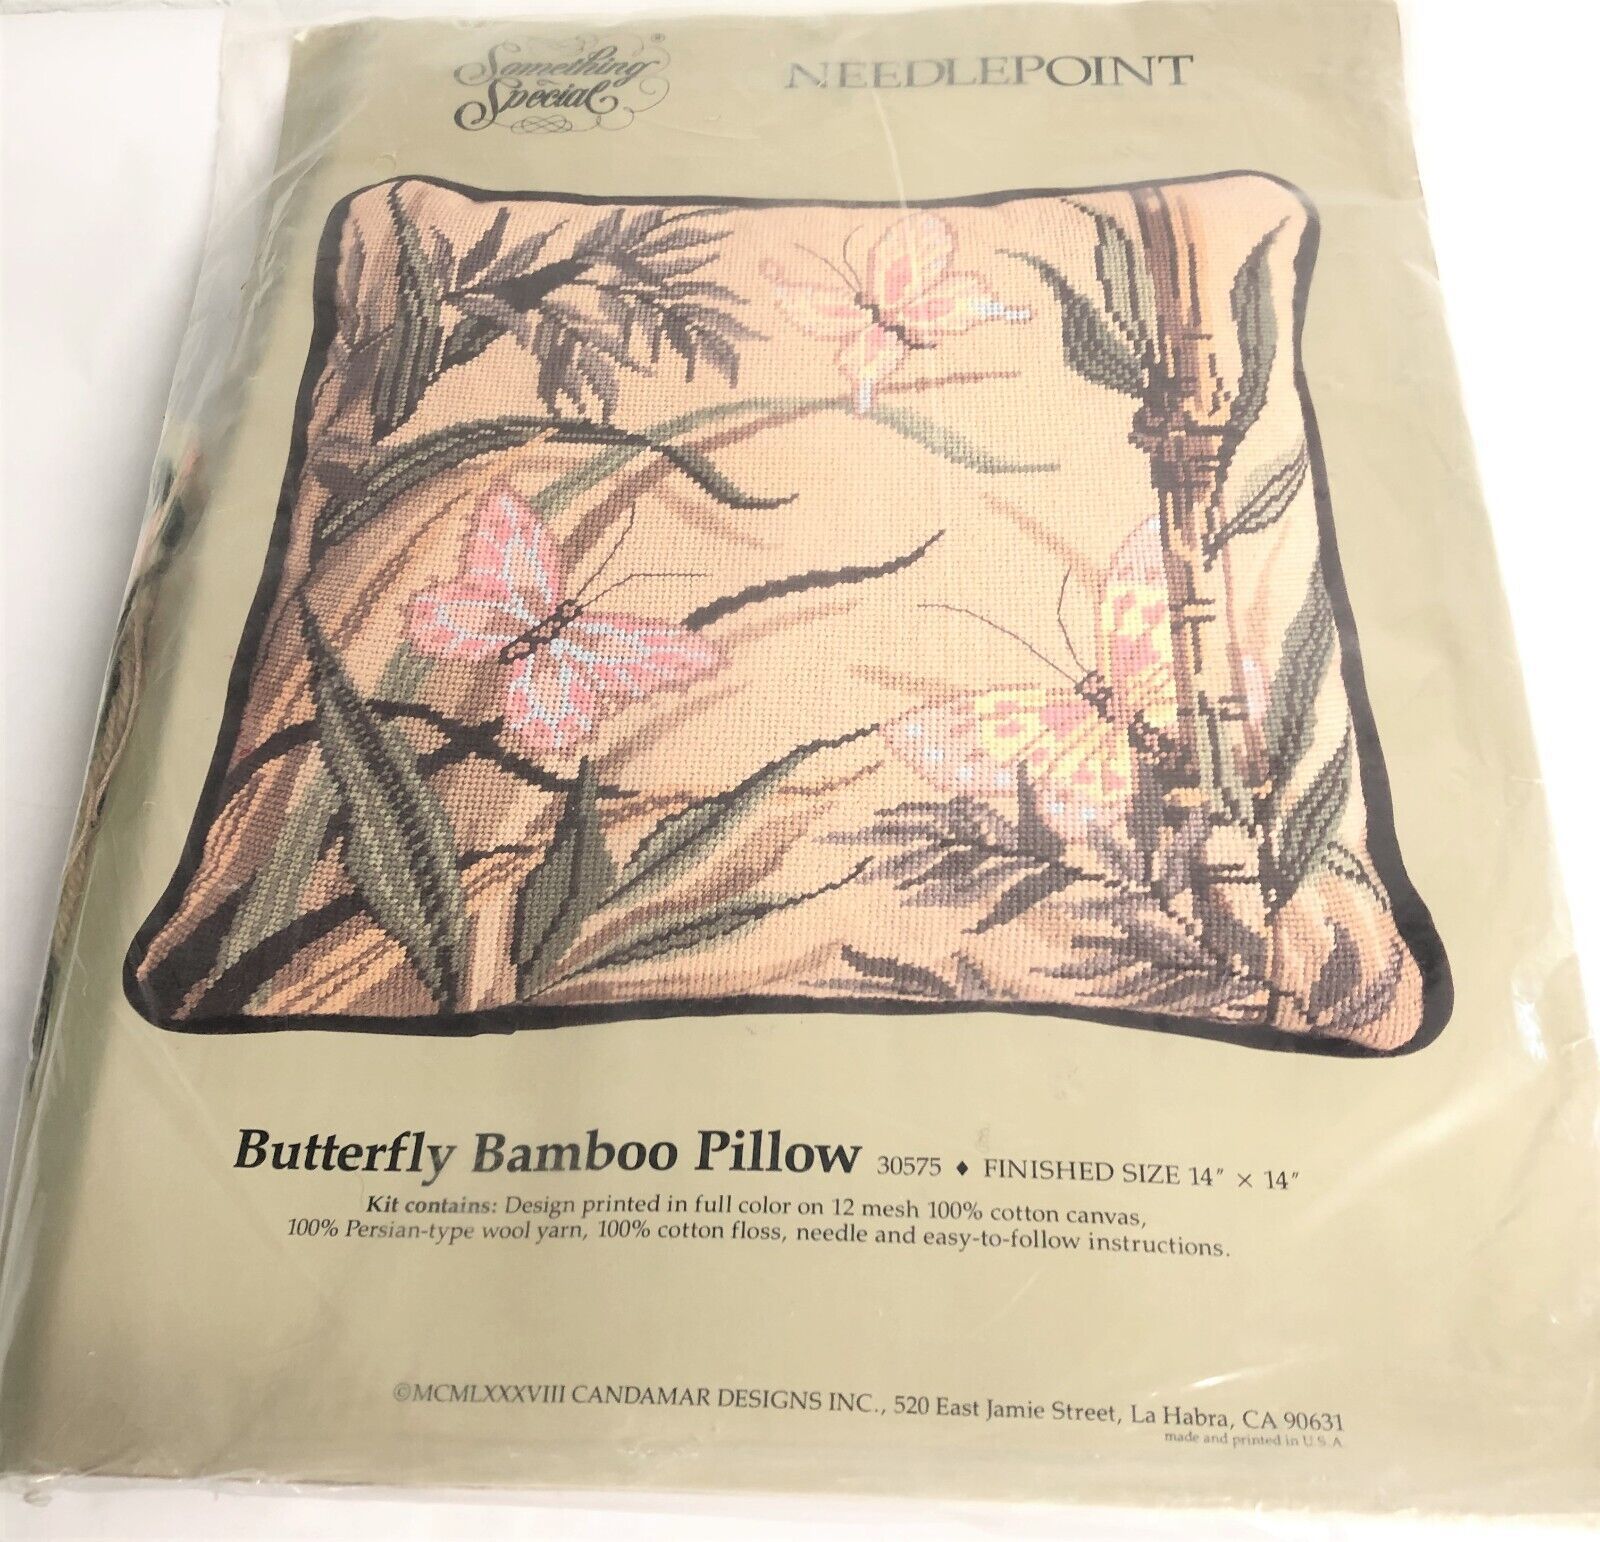 Something Special Butterfly Bamboo Pillow Needlepoint 30575 Candamar 1988 14 in - $40.37